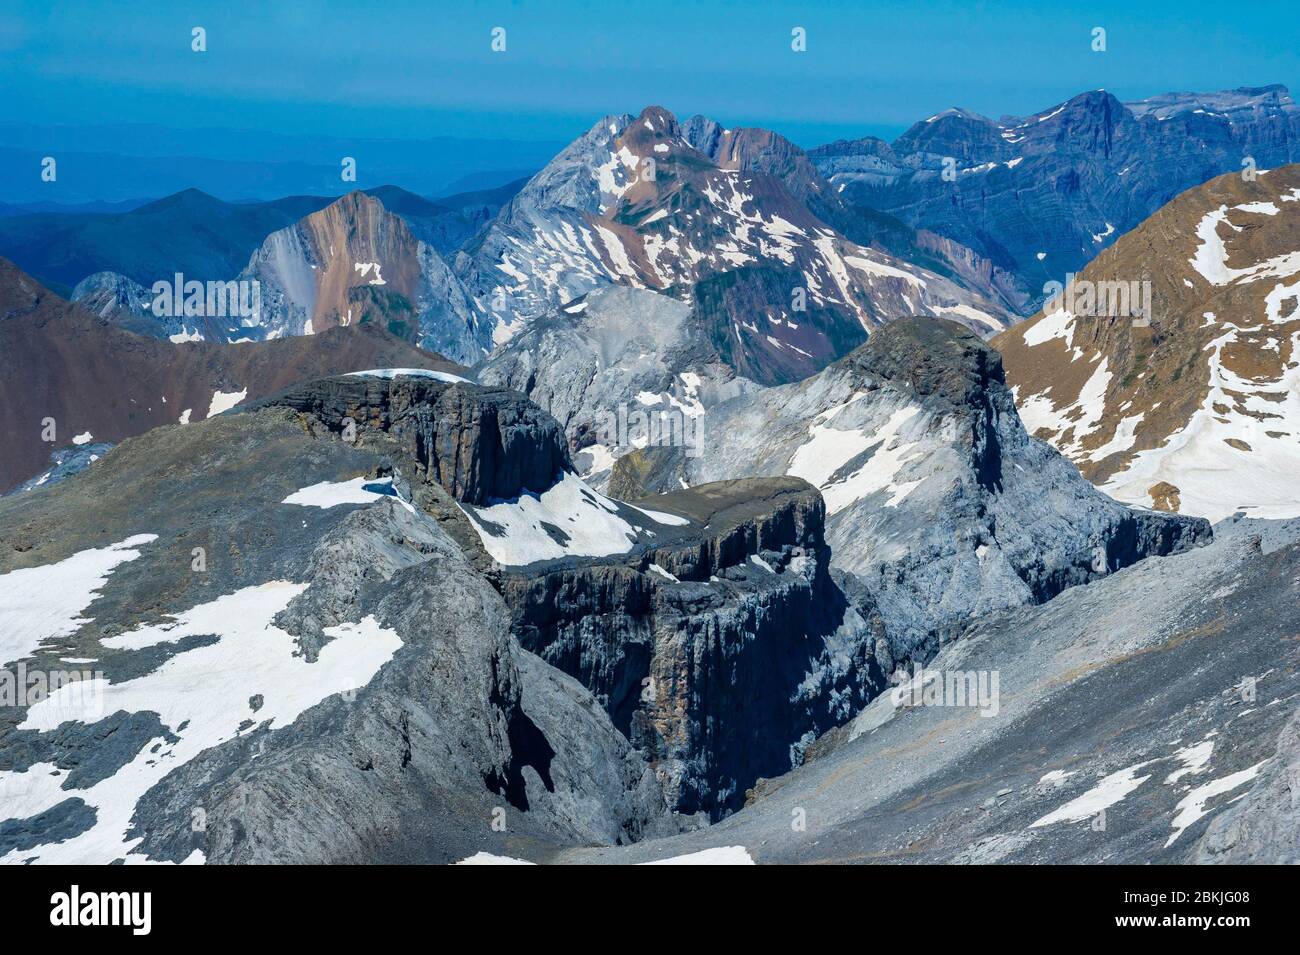 Spain, Aragon, comarque of Sobrarbe, province of Huesca,National Park of Ordesa and Monte Perdido, listed as World Heritage by UNESCO, sierra Tendenera and Peña de Otal in the back, from summit of Marbore 3252 m Stock Photo